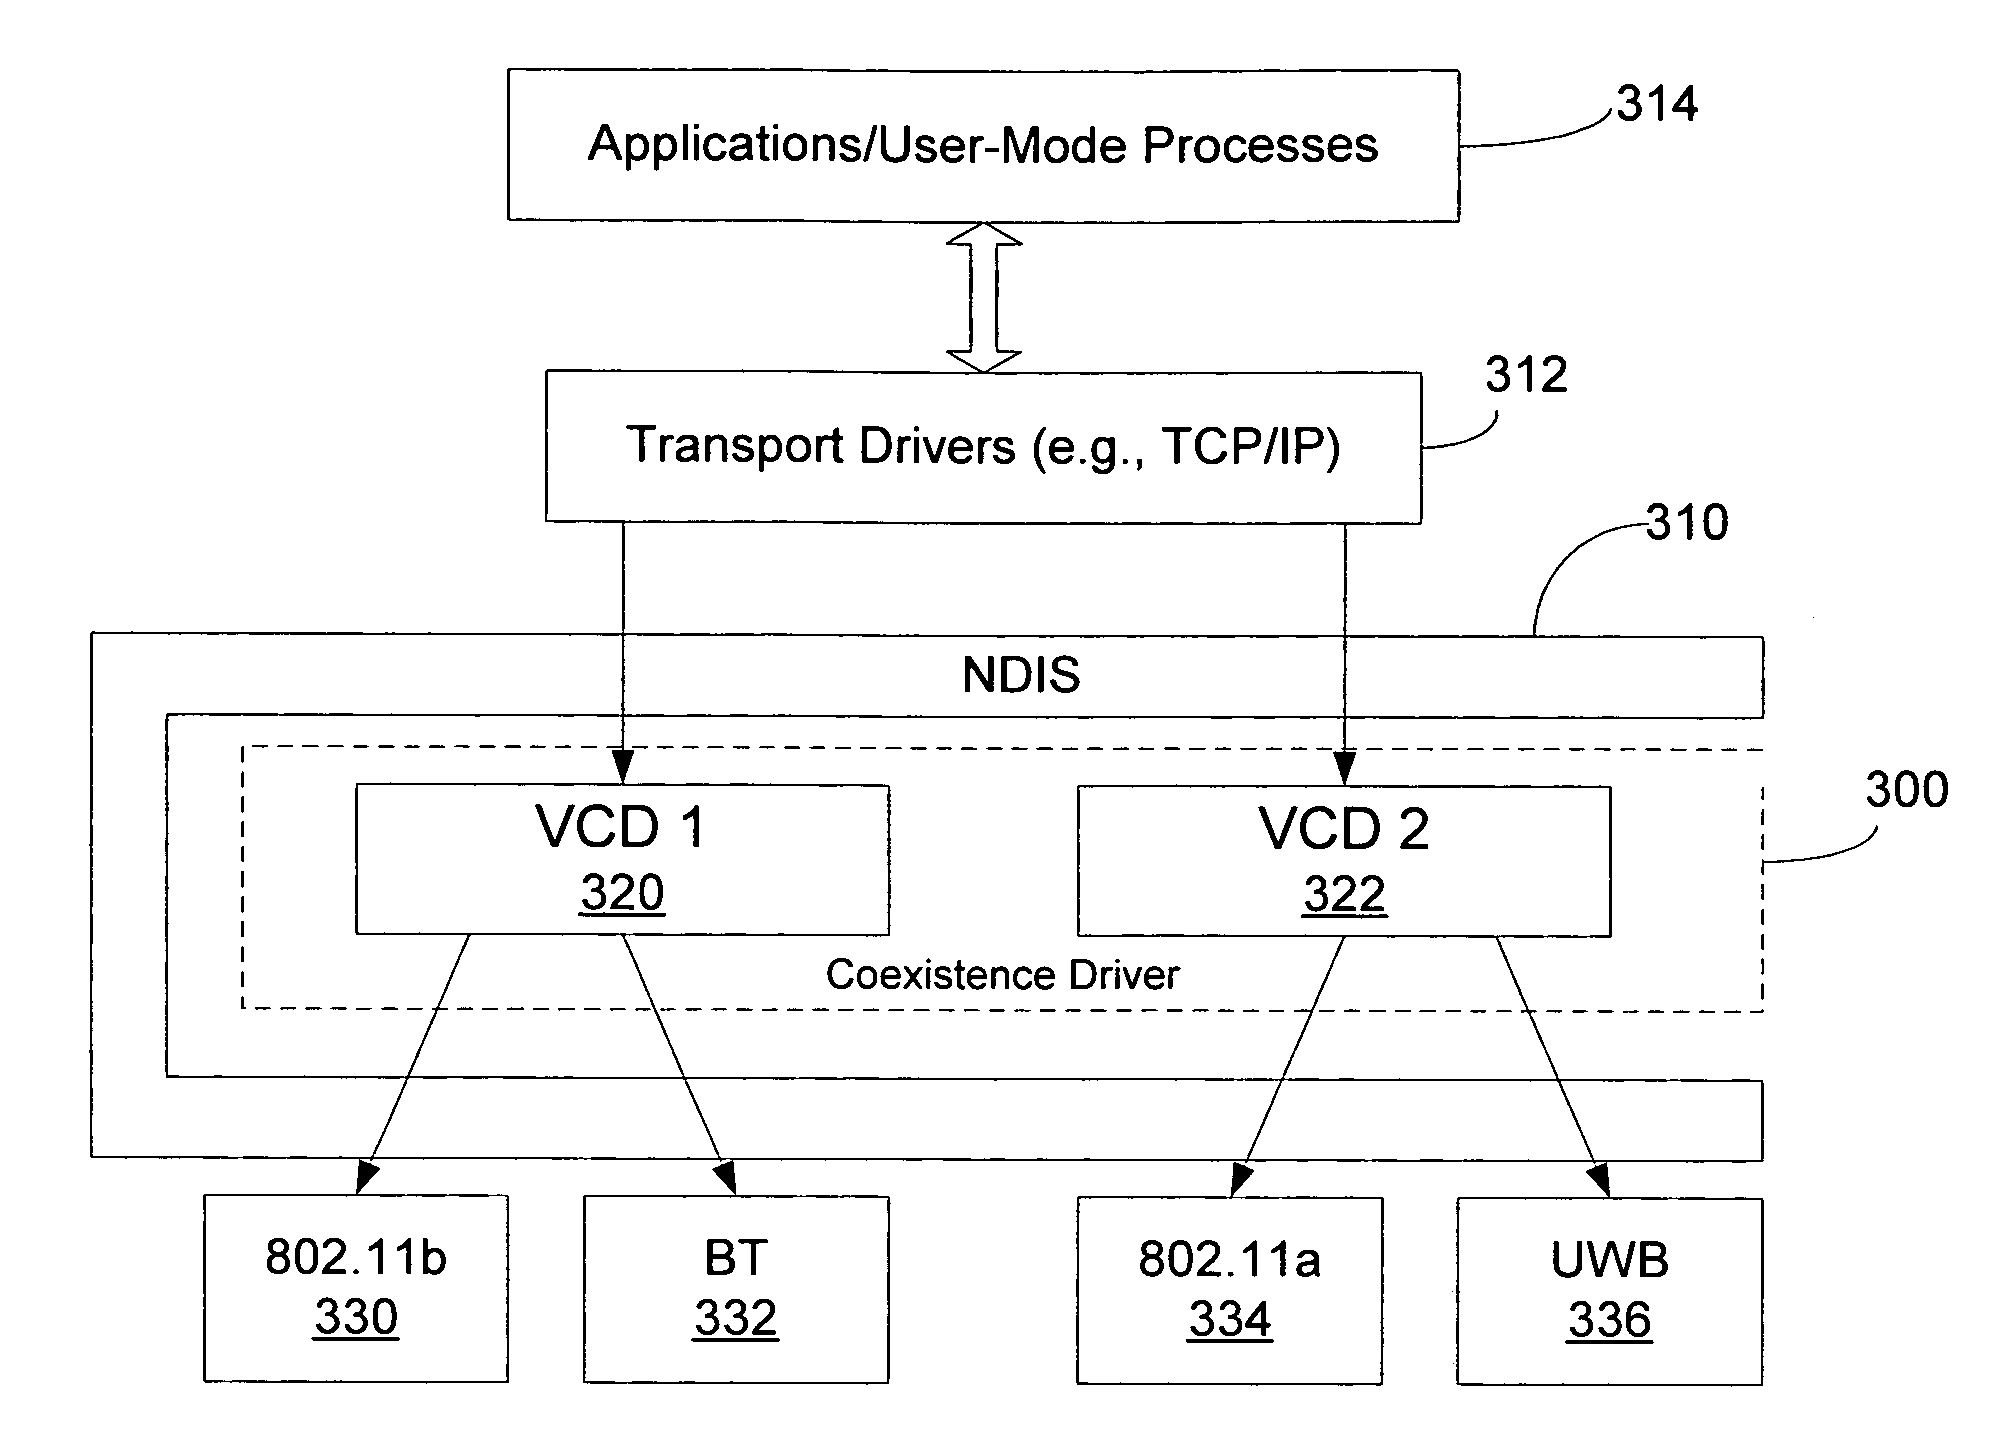 Selecting a wireless networking technology on a device capable of carrying out wireless network communications via multiple wireless technologies